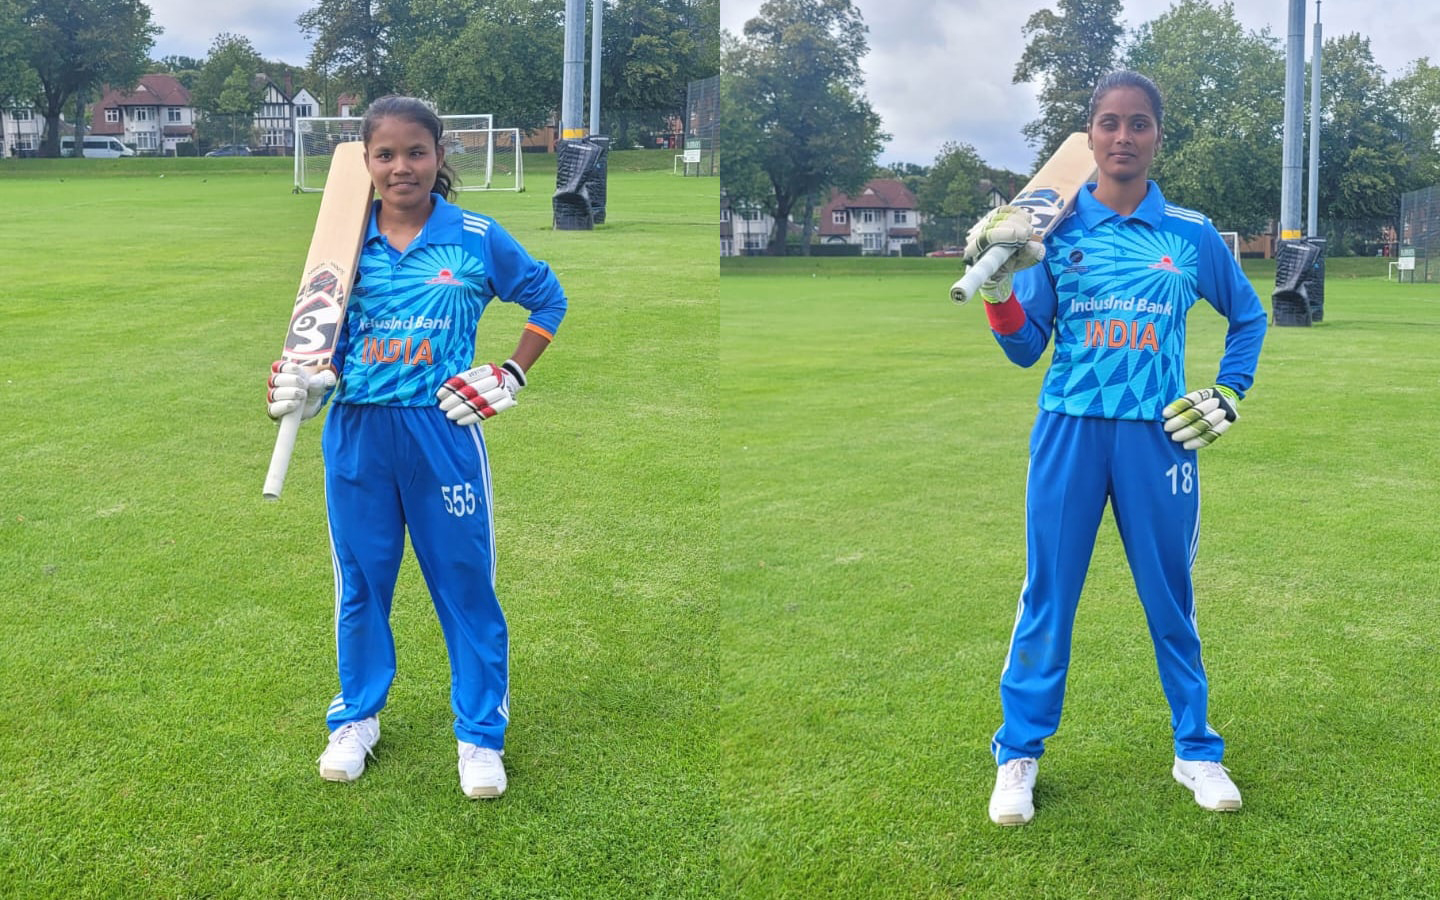 Ganga and Phula showcased their batting prowess, amassing a formidable total of 117 and 49 runs